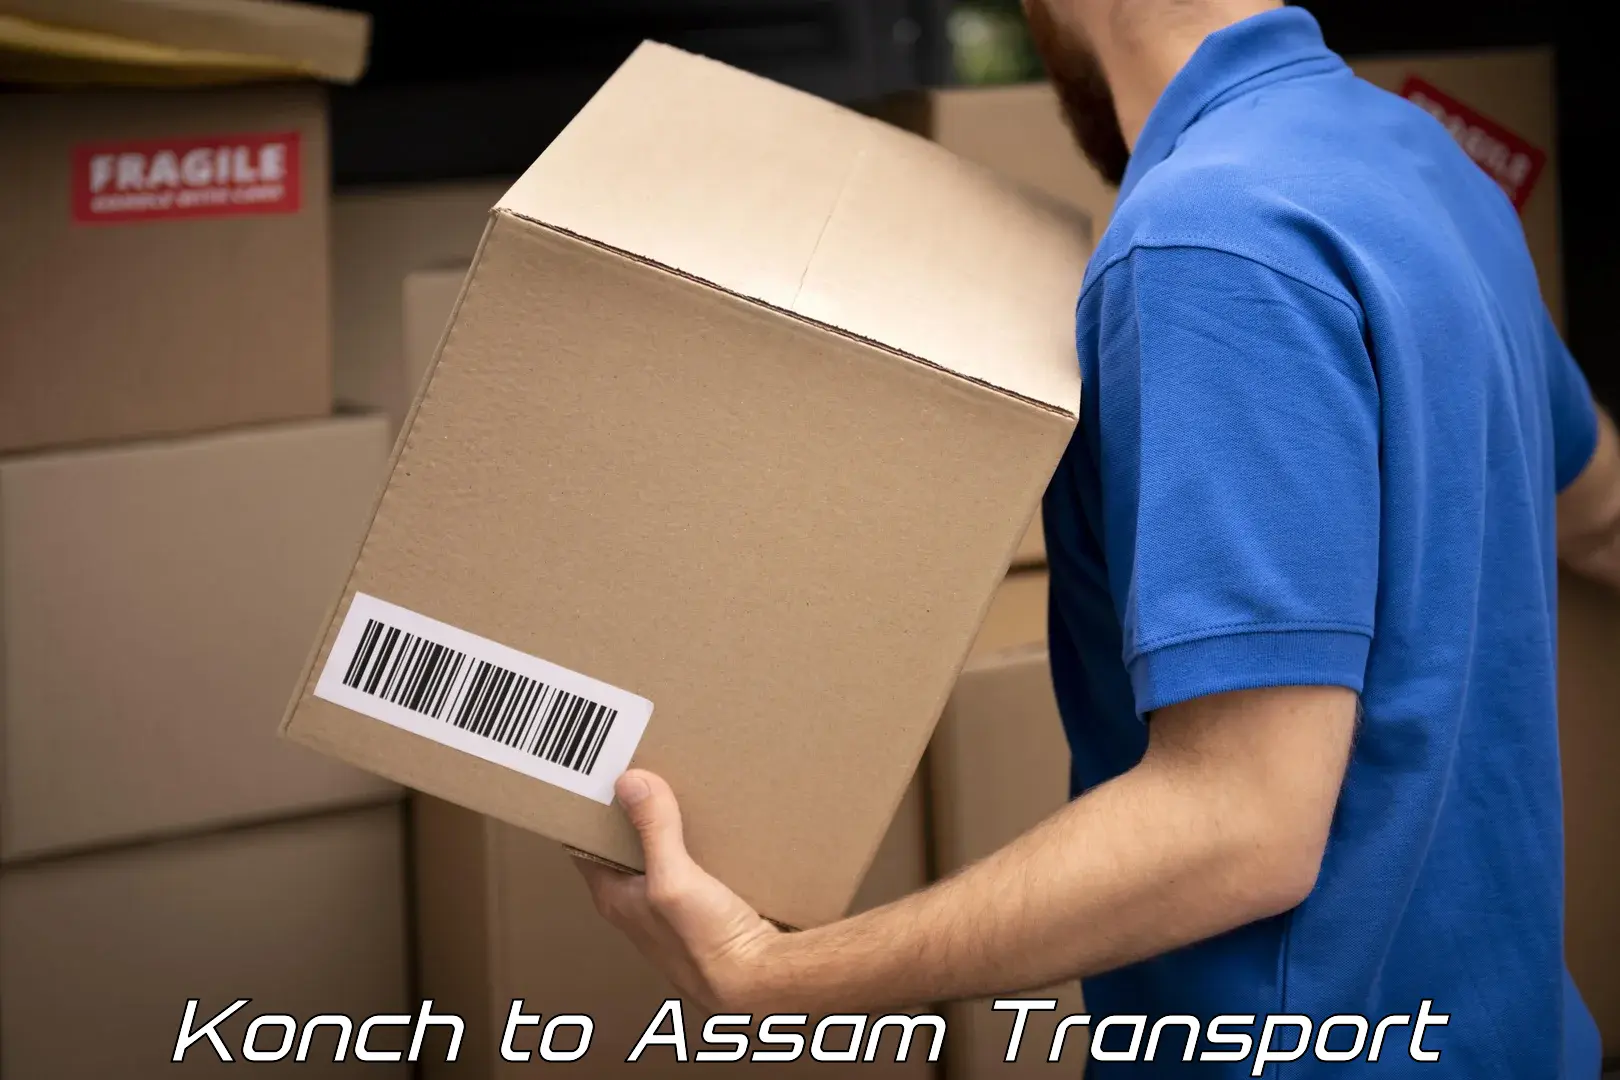 Transport in sharing Konch to Assam